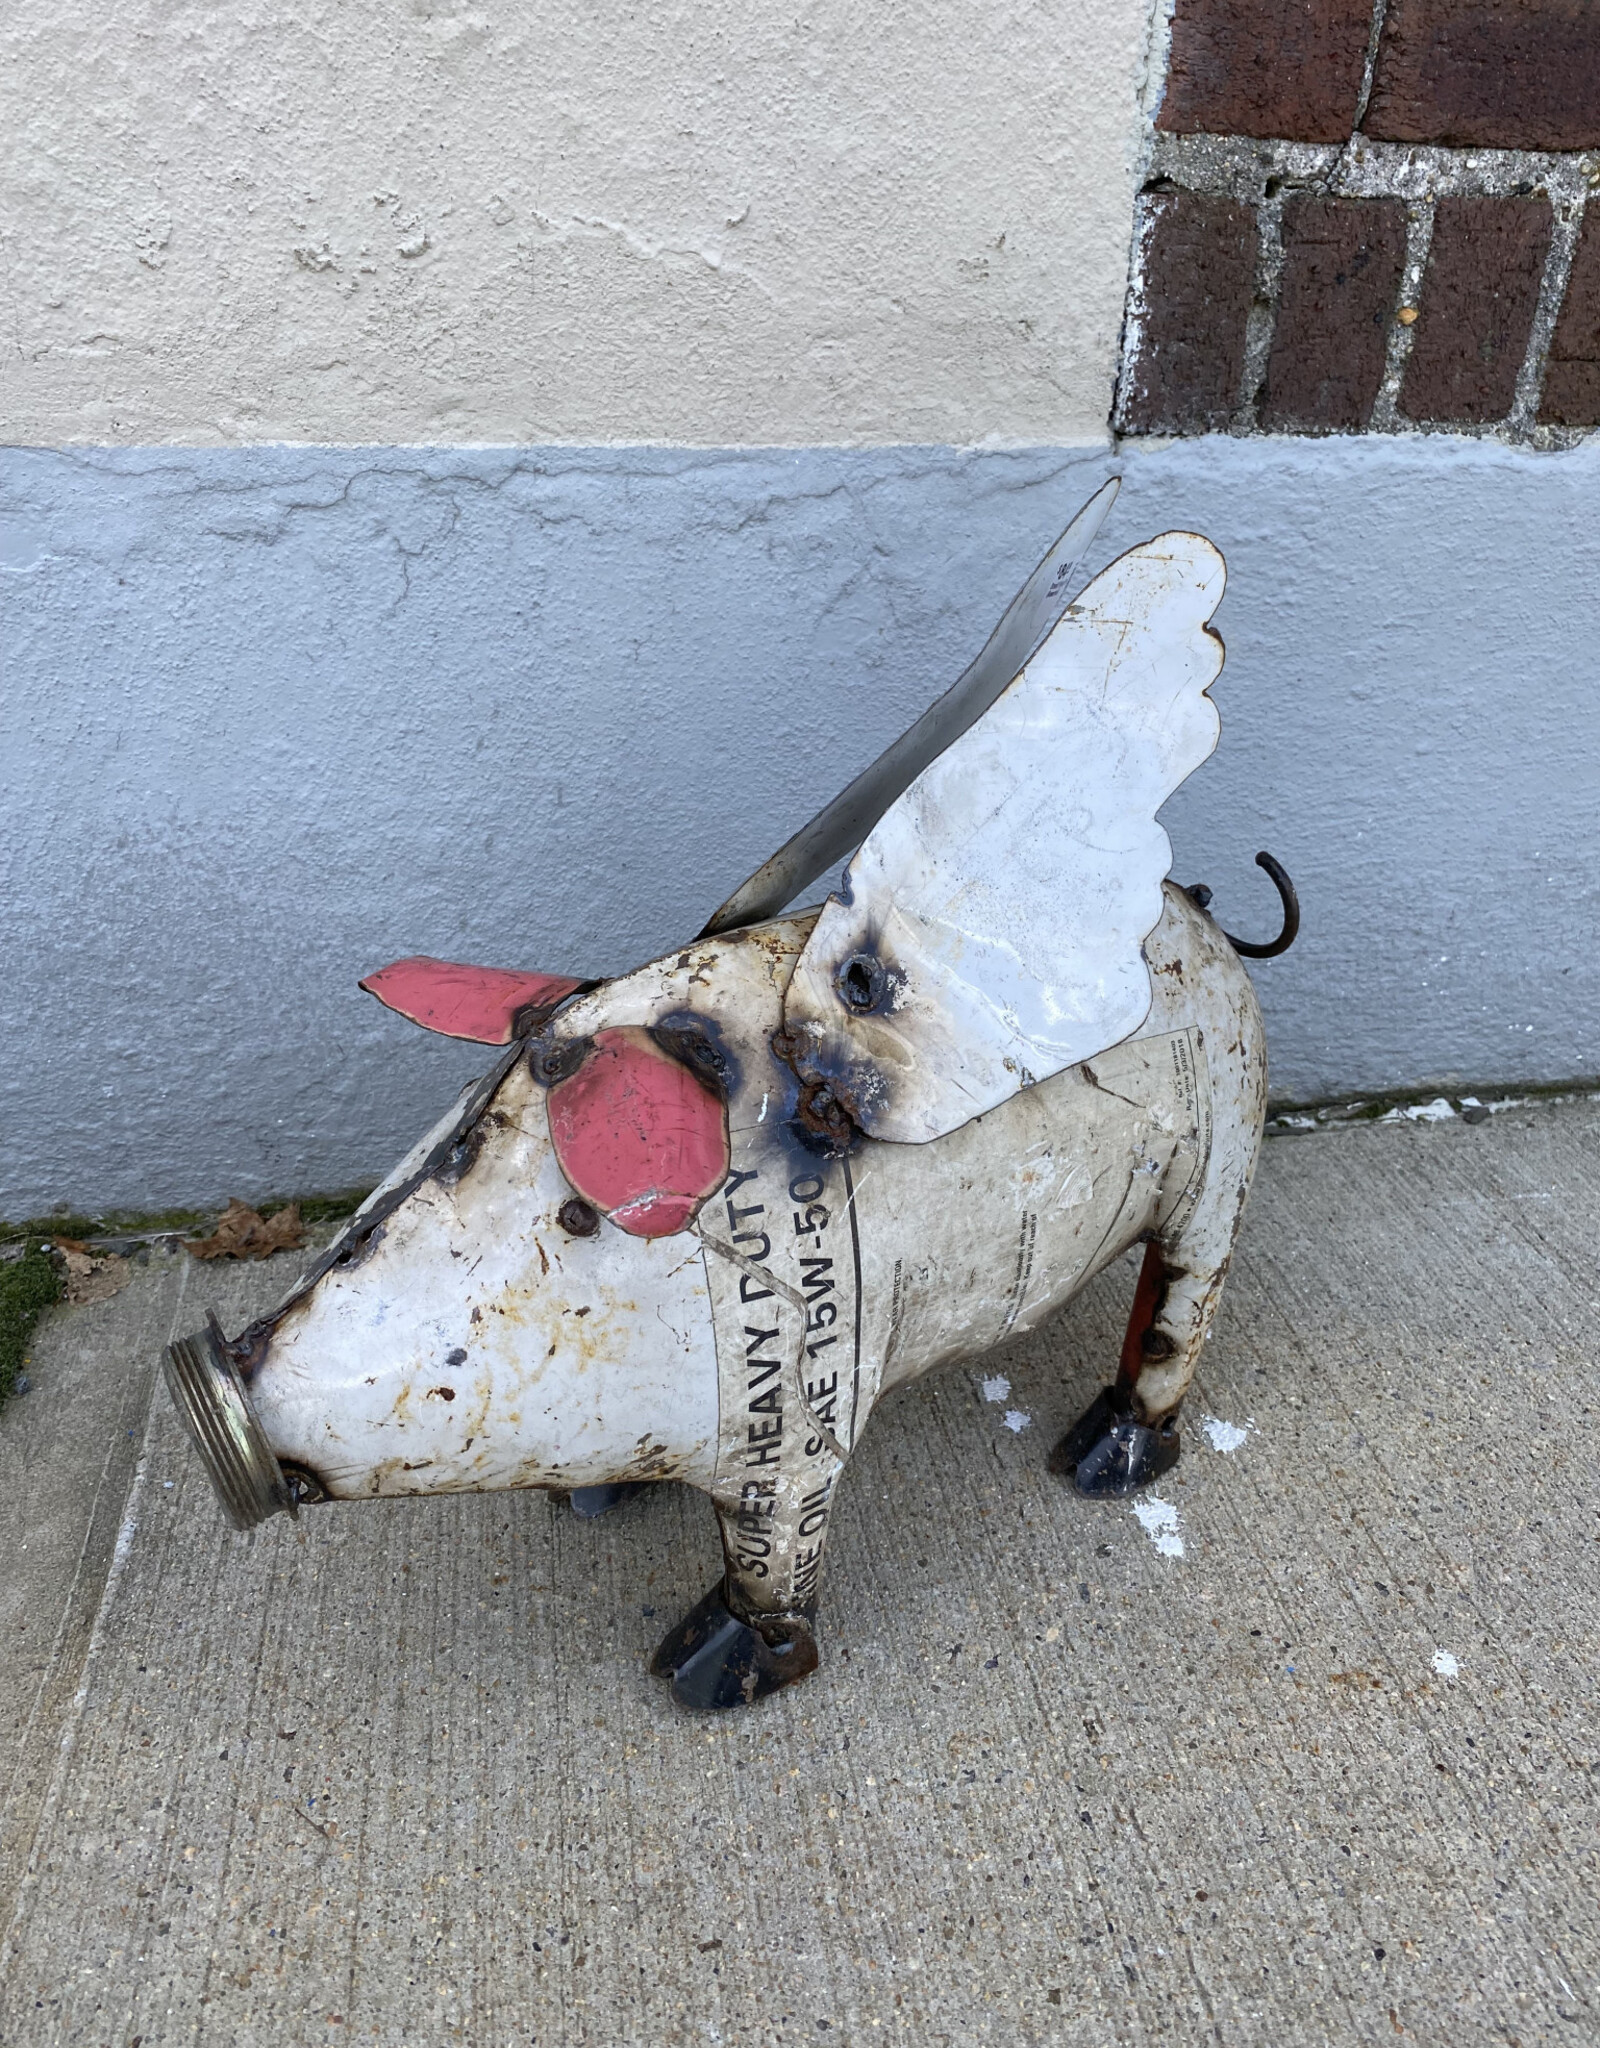 Small Flying Pig - CURBSIDE PICK UP ONLY